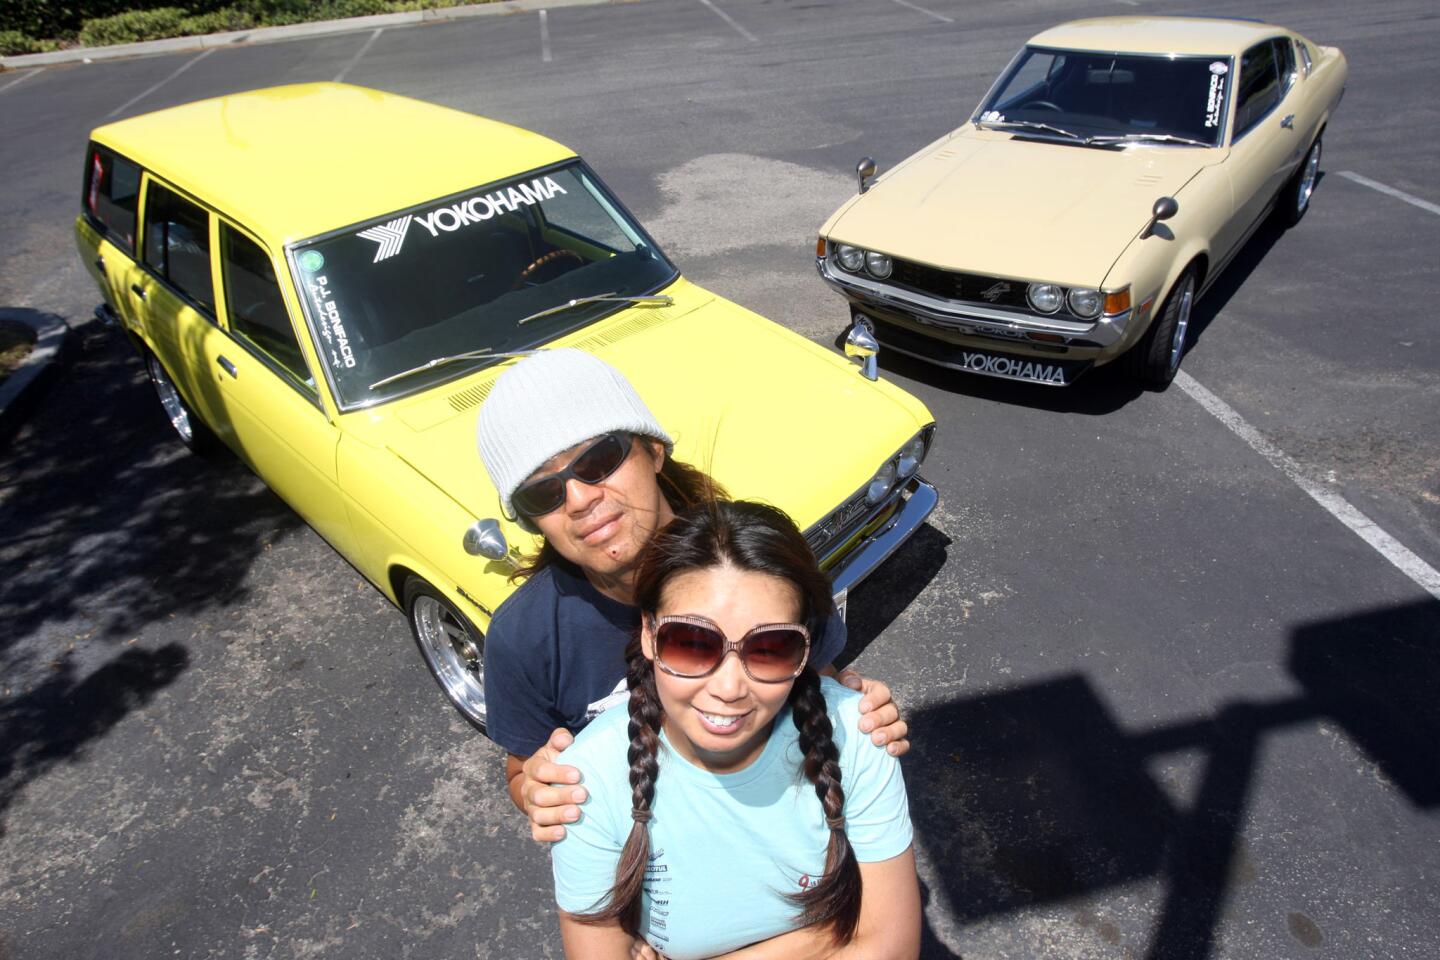 Terry, right, and Koji Yamaguchi with two of their classic cars on May 14 in La Mirada. They have a 1972 Datsun 510 wagon, left, and a 1977 Toyota Celica liftback. They are organizers of the 10th Annual Japanese Classic Car Show.